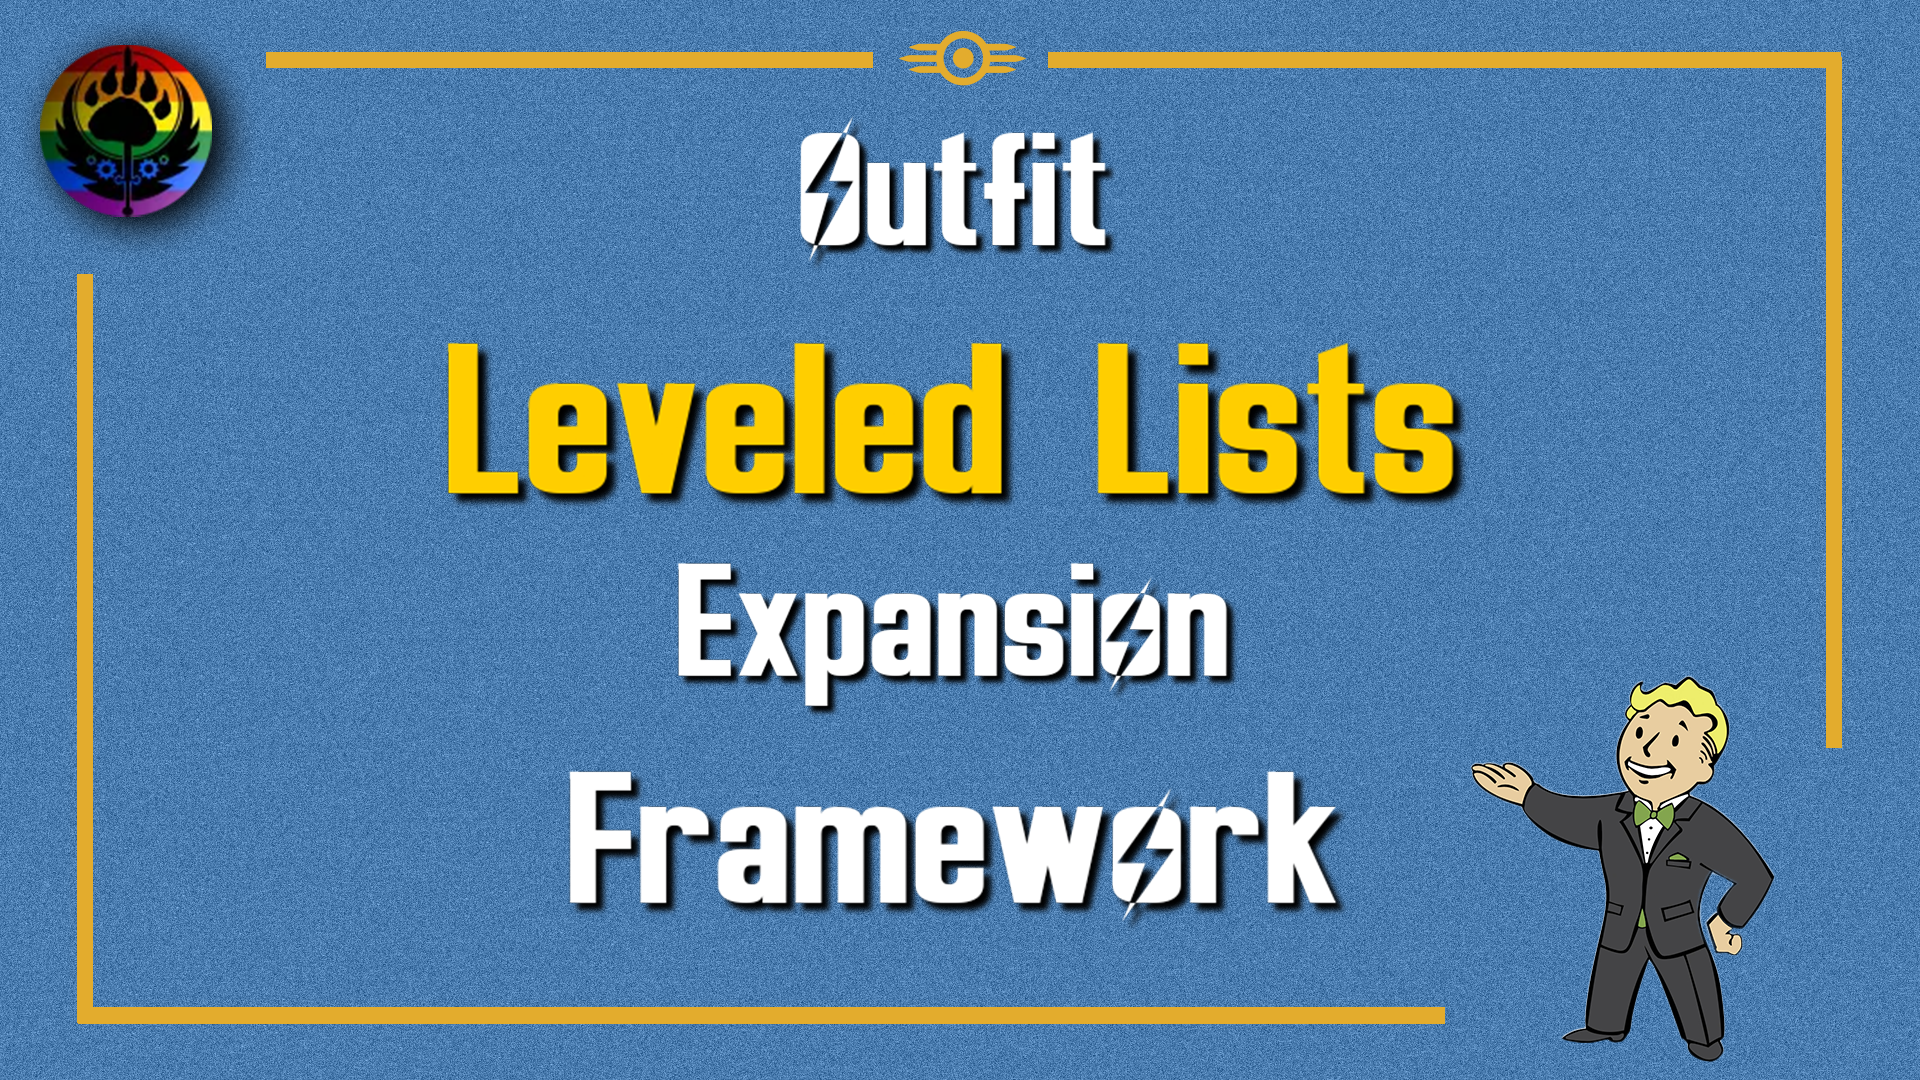 Outfit Leveled Lists Expansion Framework